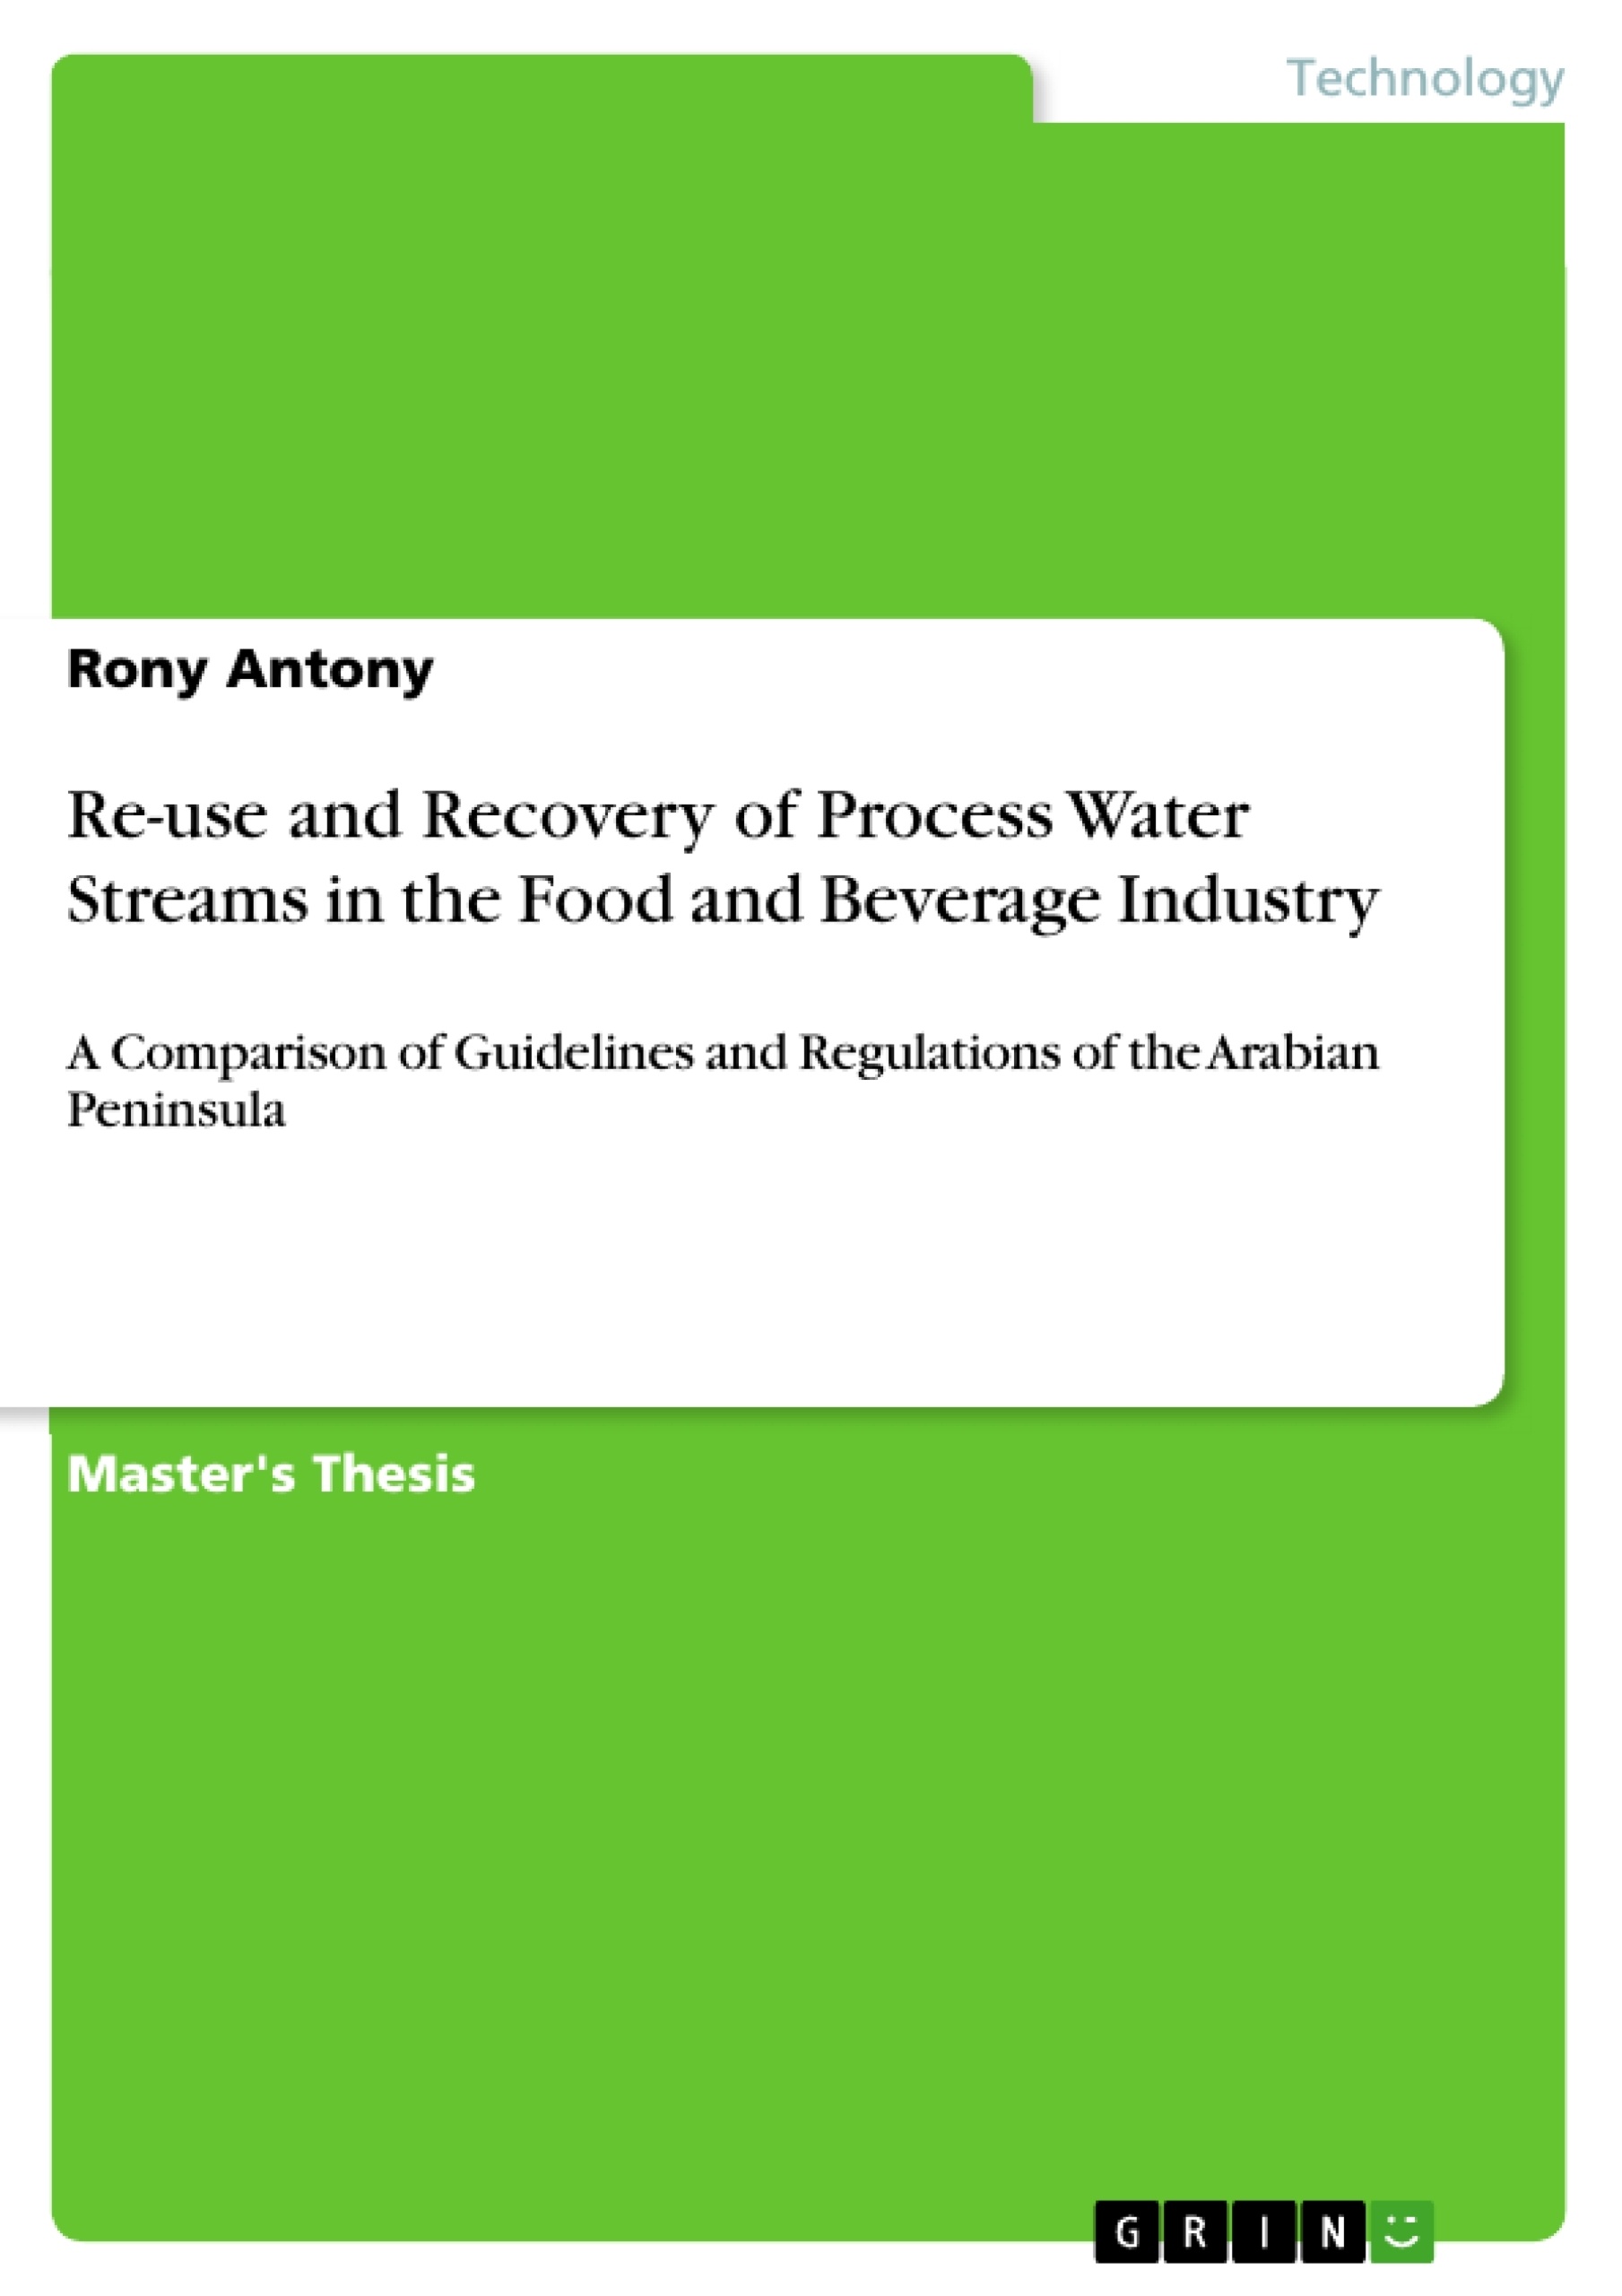 Title: Re-use and Recovery of Process Water Streams in the Food and Beverage Industry